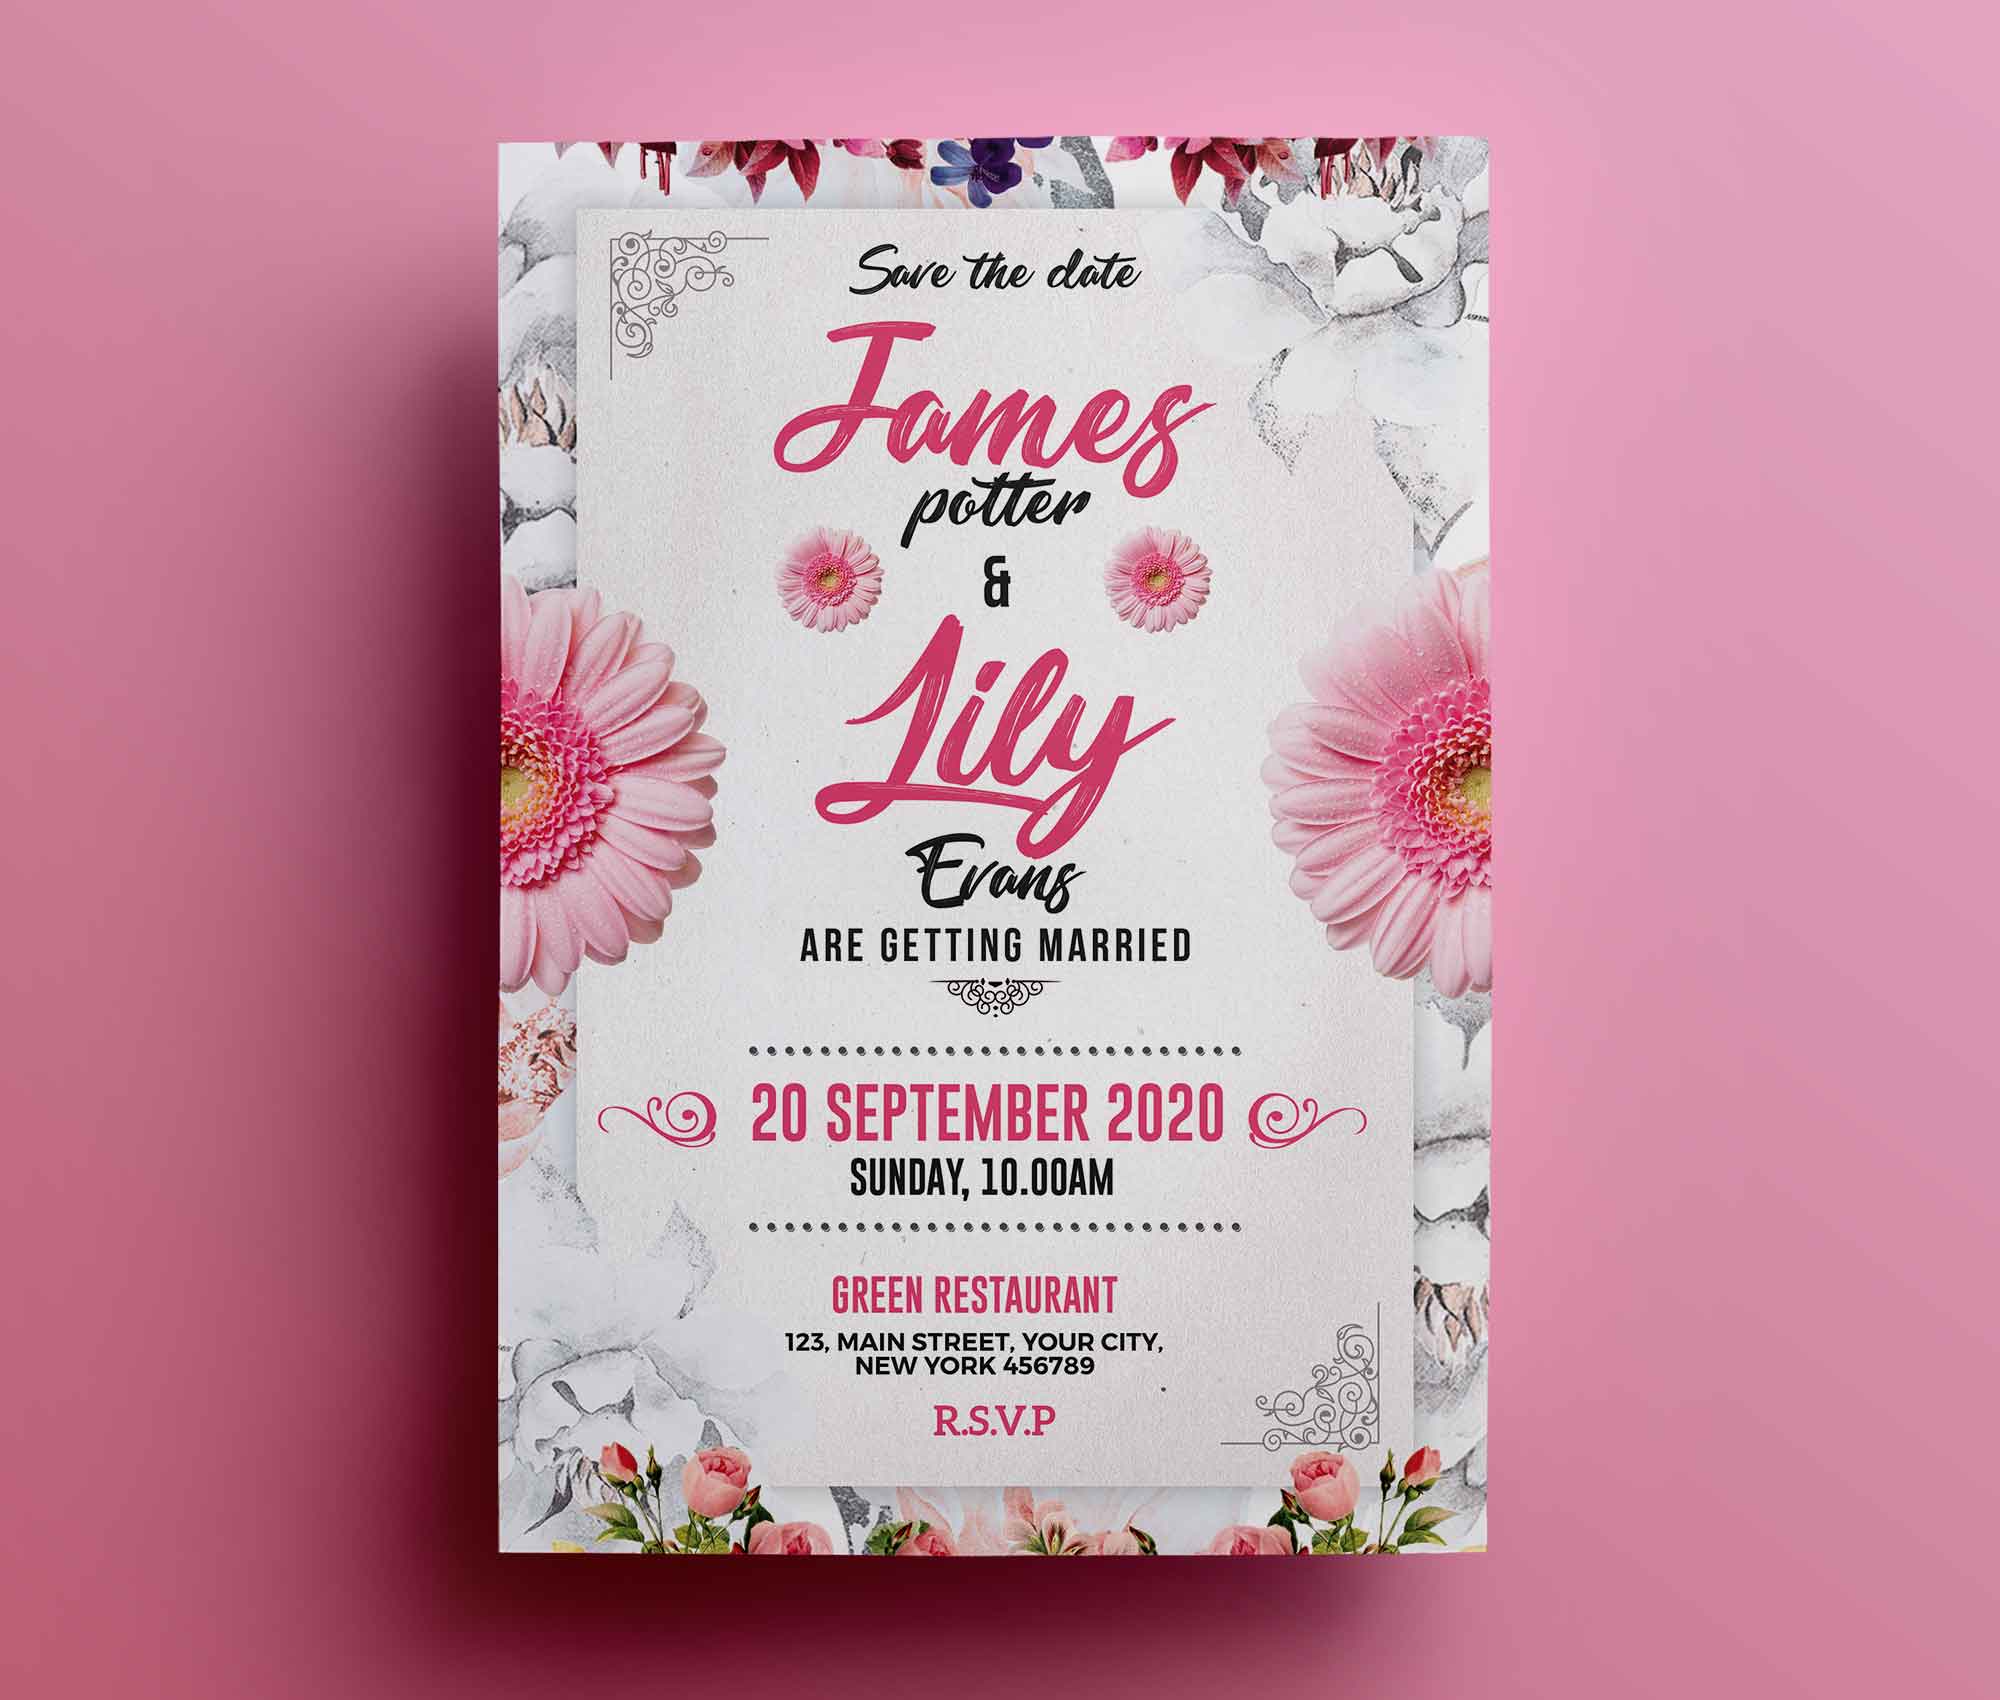 James & Lily Wedding Invitation Card Template 